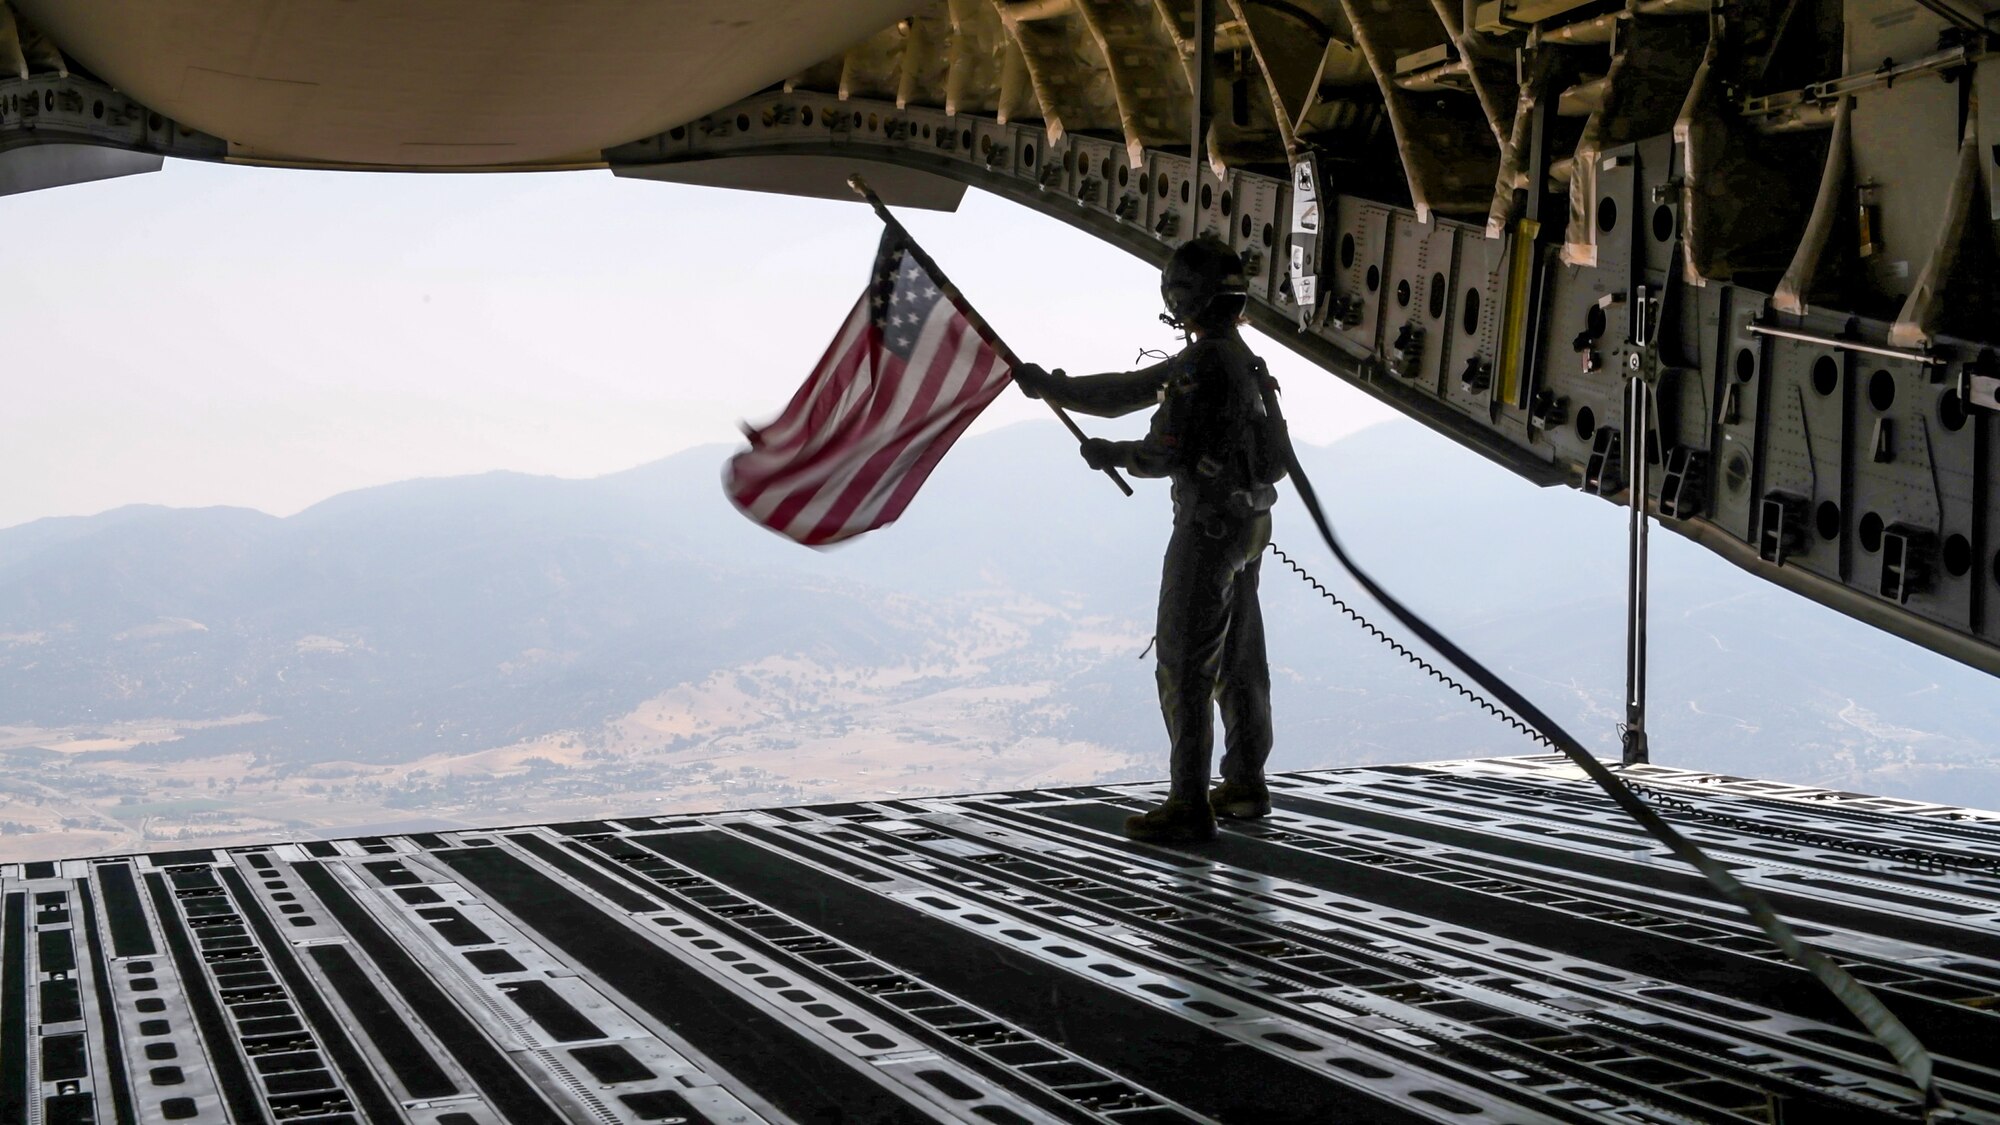 Staff Sgt. Kori Myers, 418th Flight Test Squadron C-17 load master, waves the U.S. flag from the back of a C-17 Globemaster III during the 2020 Aerospace Valley Air Show at Edwards Air Force Base, Oct. 9. (Air Force photo by Giancarlo Casem)